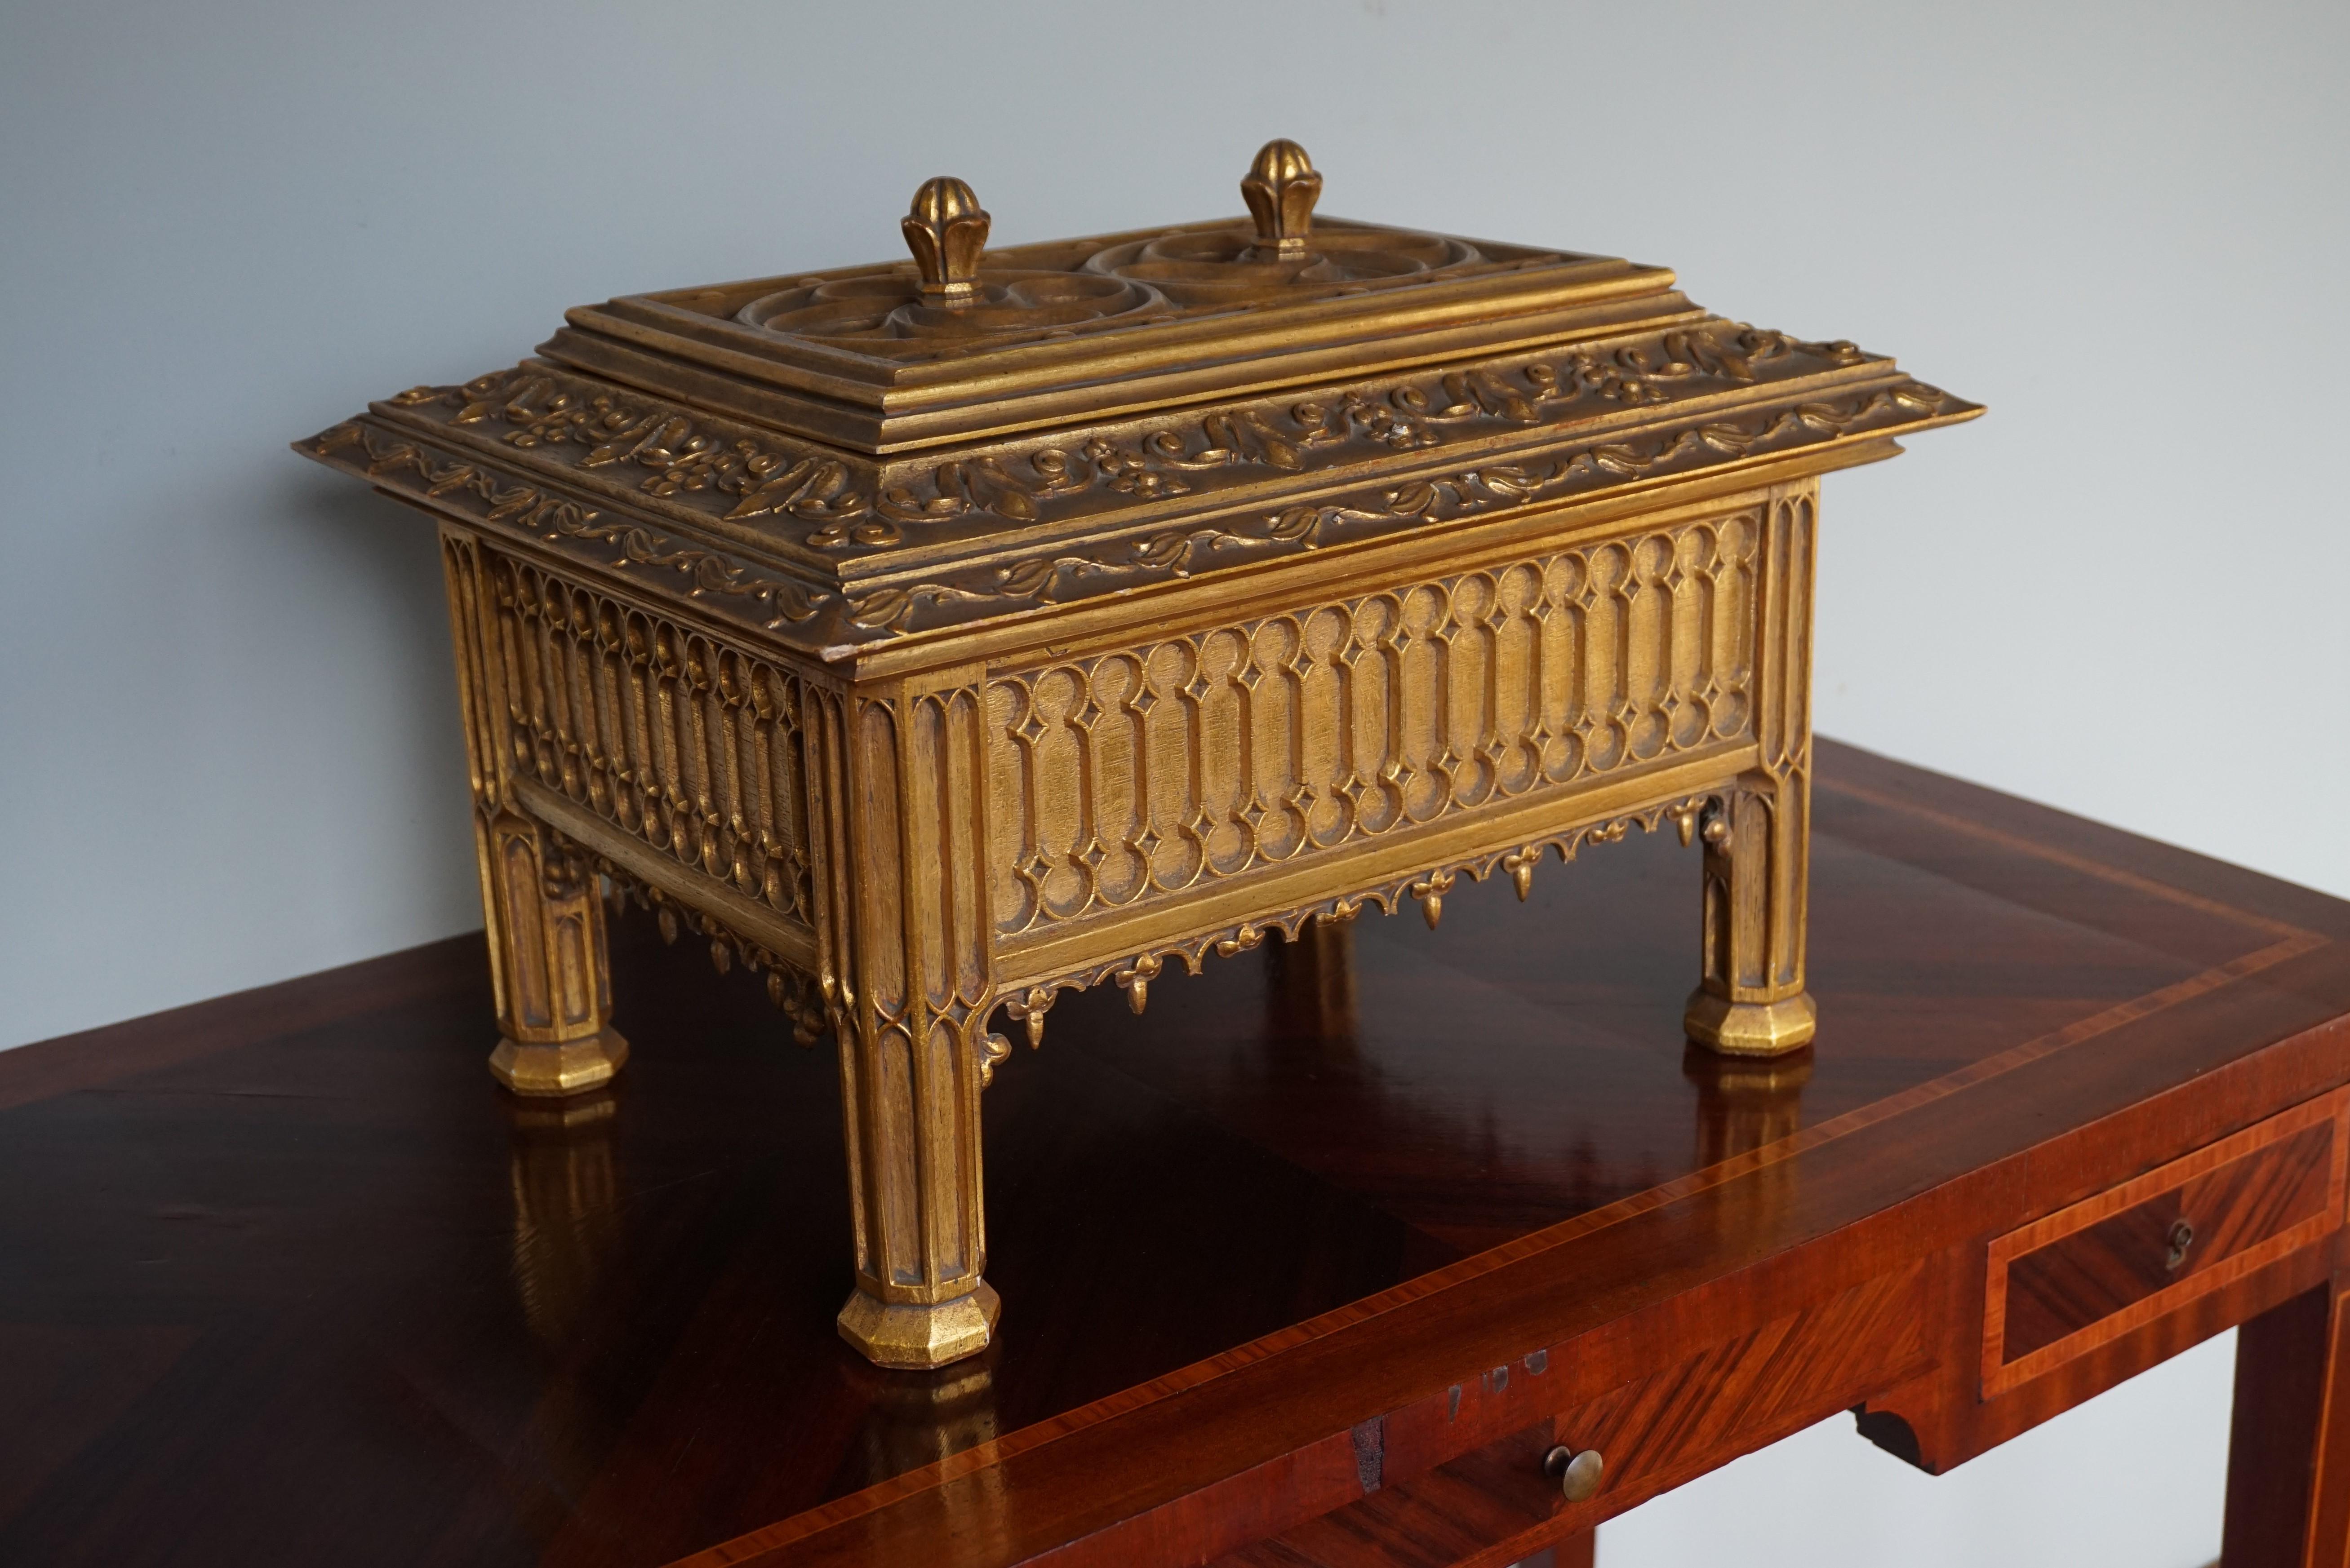 Very rare Gothic casket / box for keeping religious artefacts.

Over the past 12 months we have offered a number of very rare works of religious art that we purchased from an avid collector whom had passed on in early 2019. Unfortunately his